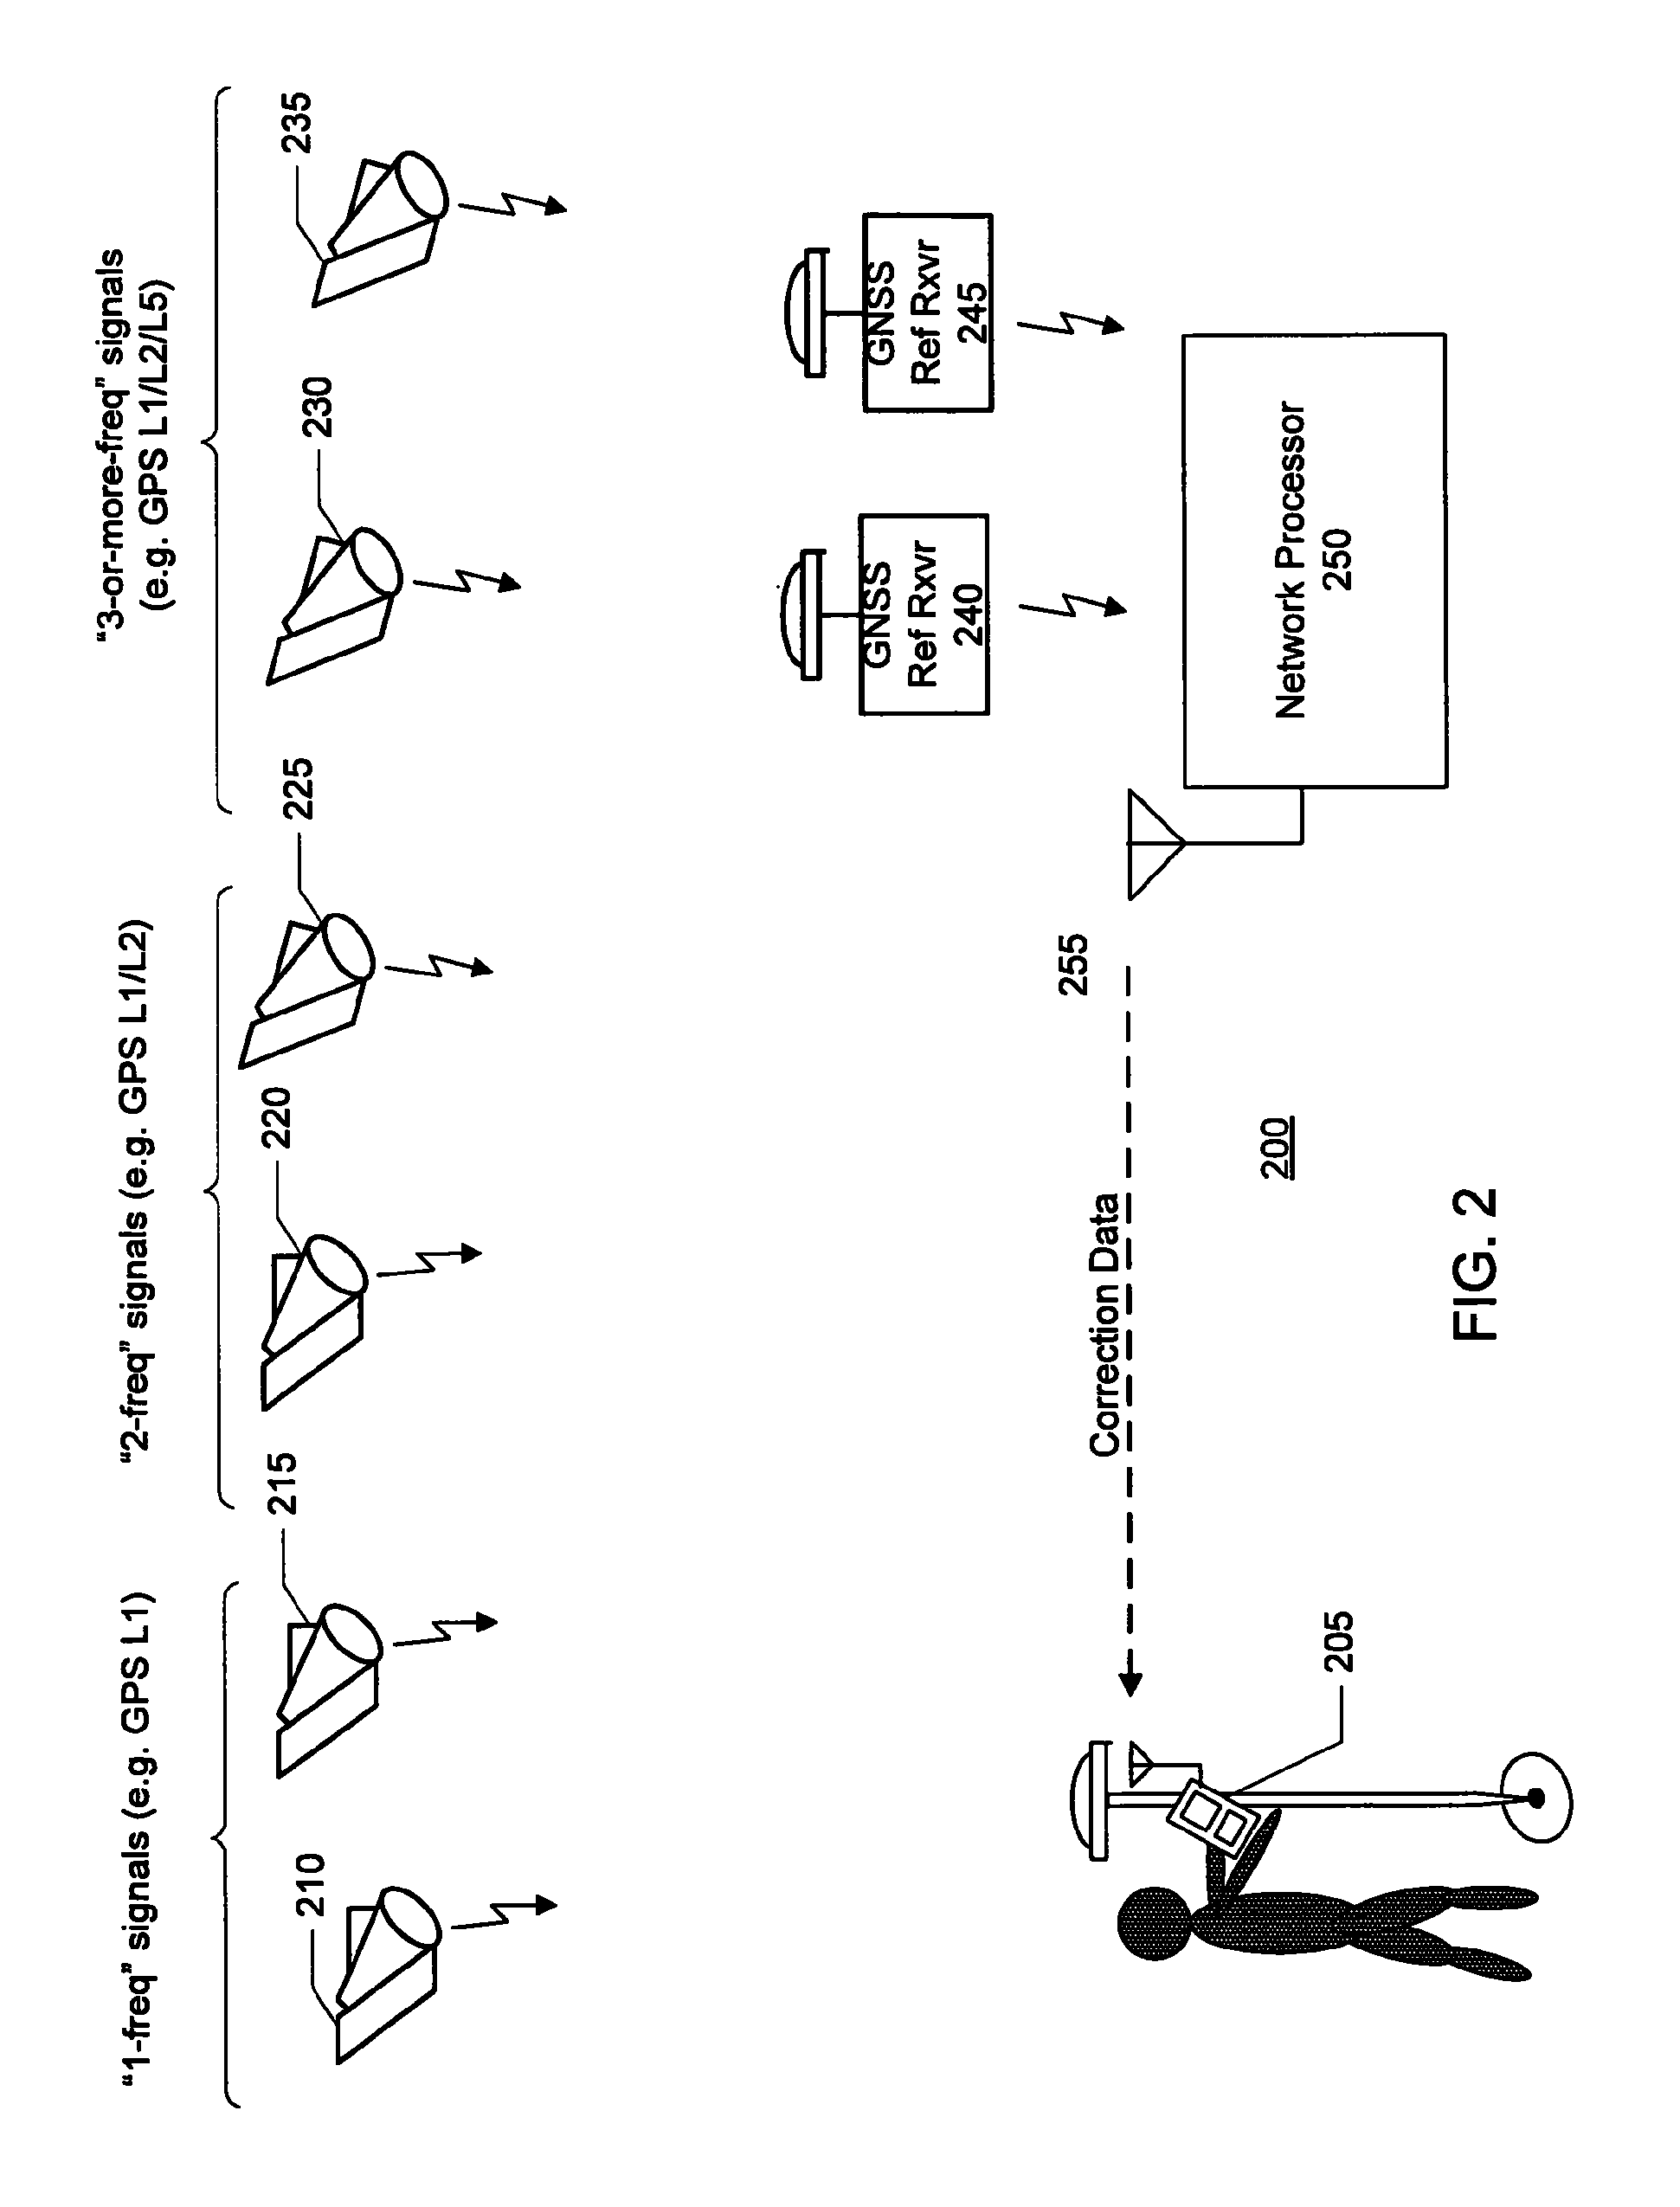 GNSS signal processing methods and apparatus with ionospheric filters